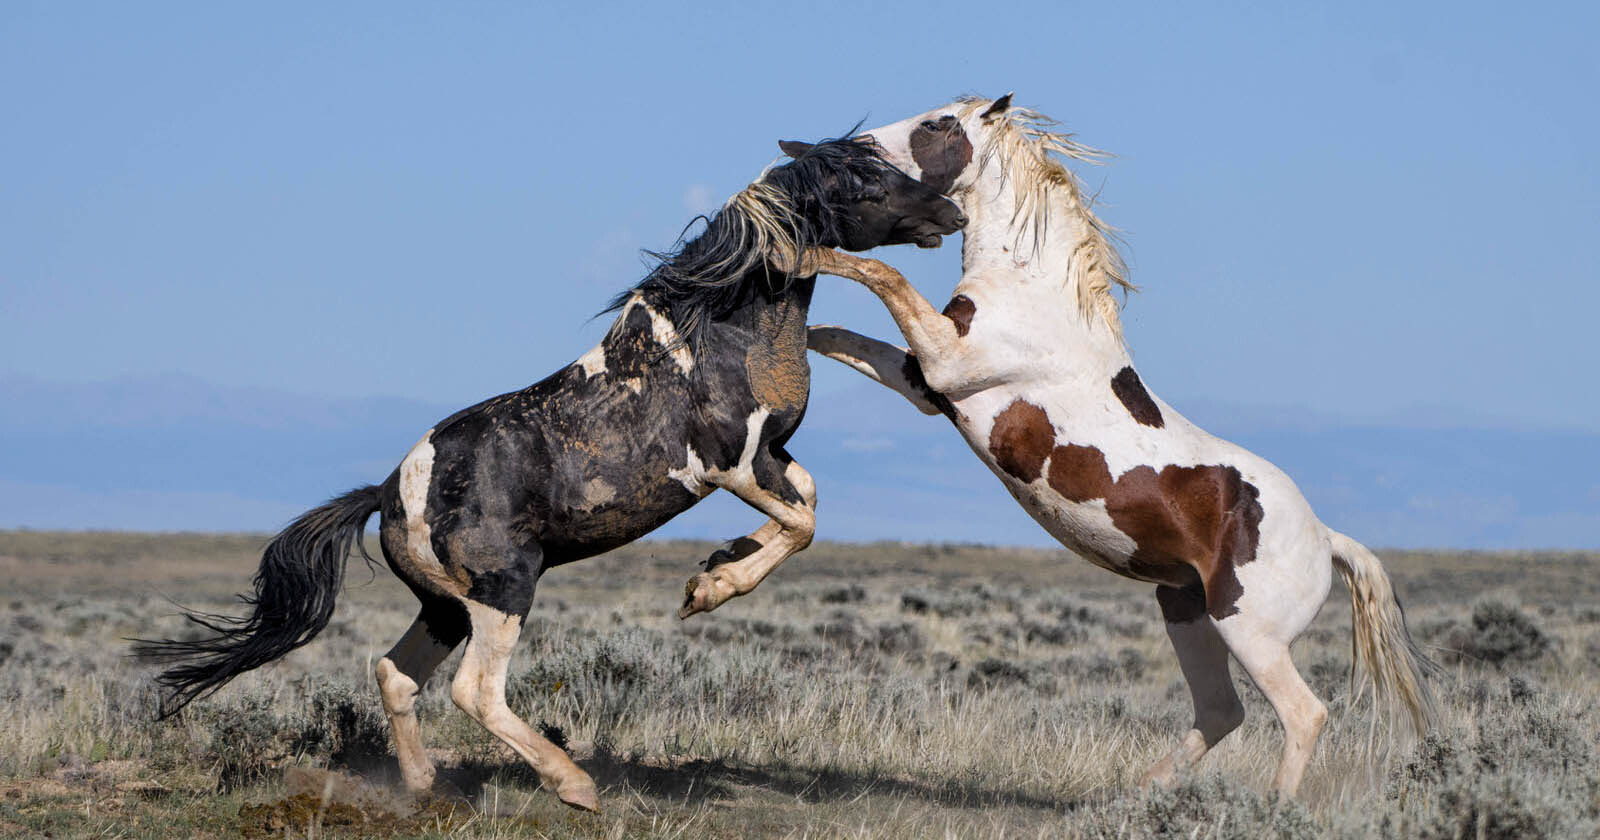 How to Find and Photograph Wild Horses in the US